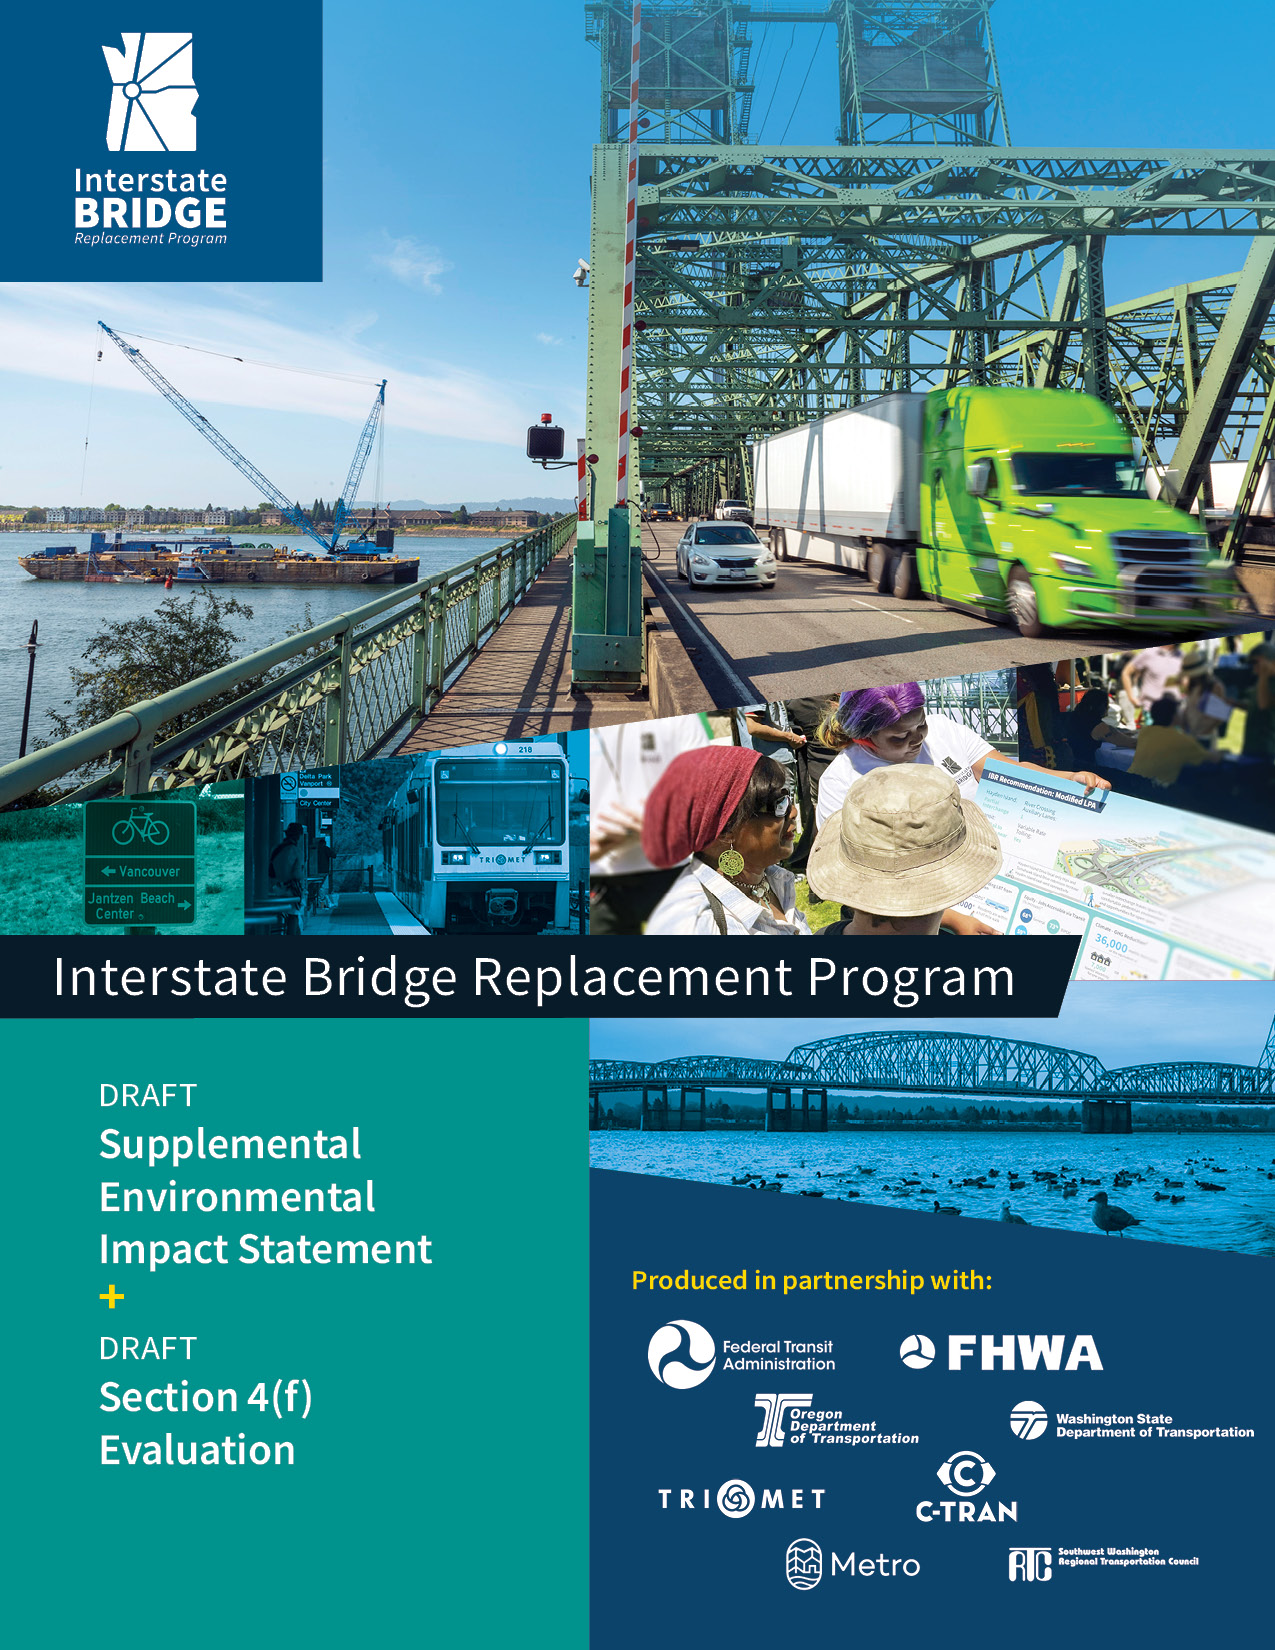 Cover of the SEIS document showing a truck crossing the bridge.